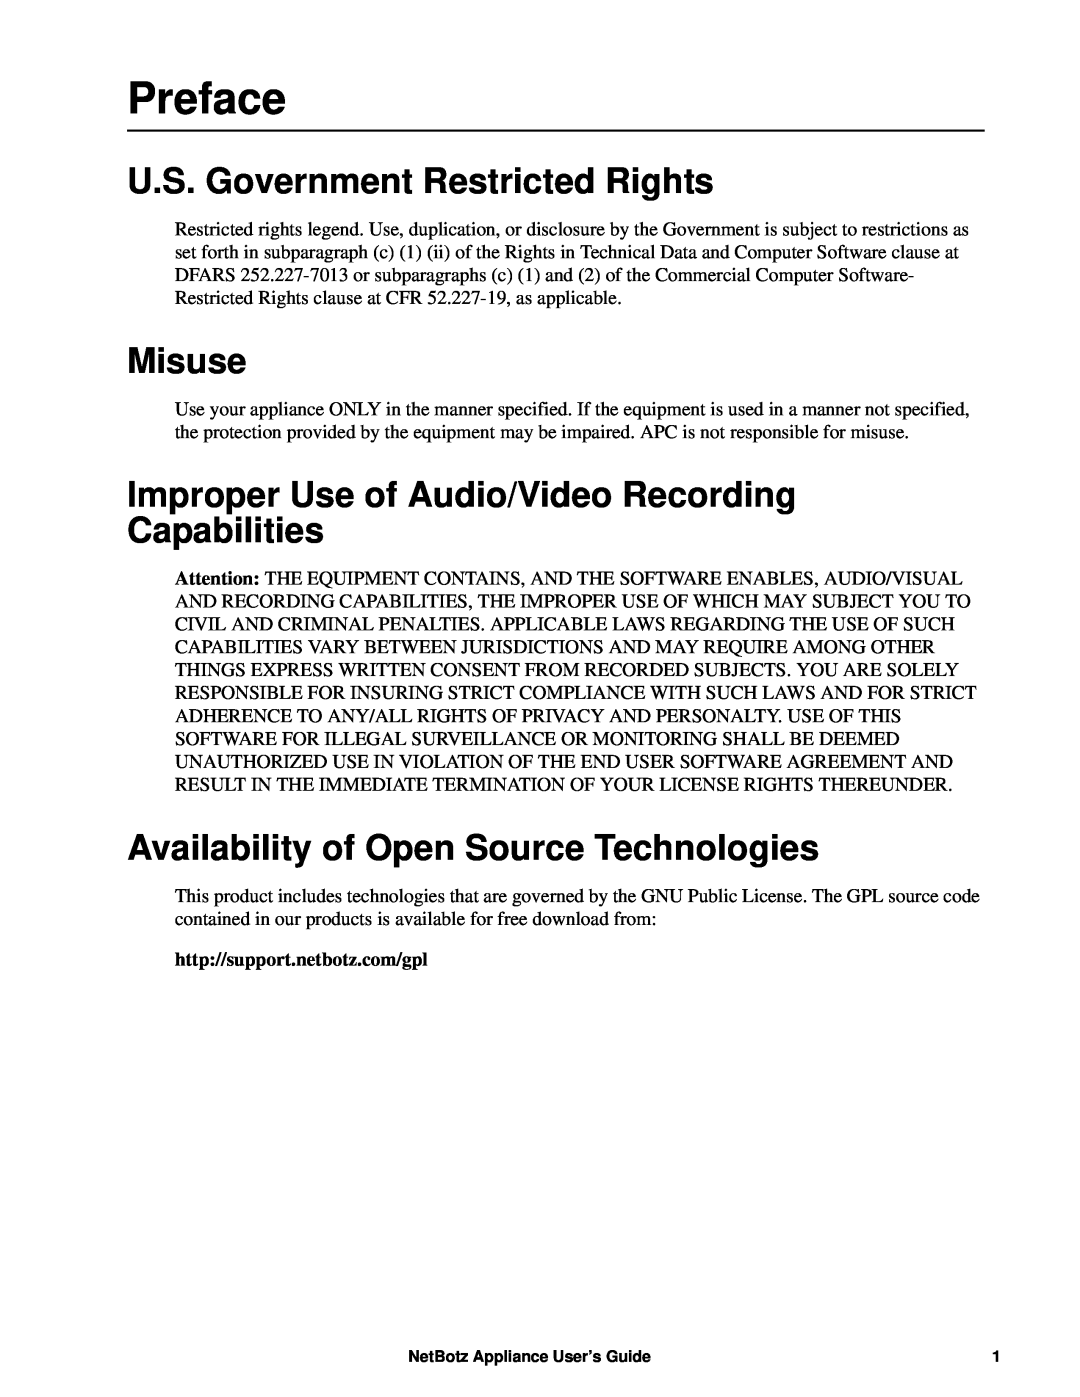 APC NBRK0570, NBRK0550 manual Preface, U.S. Government Restricted Rights, Misuse, Availability of Open Source Technologies 